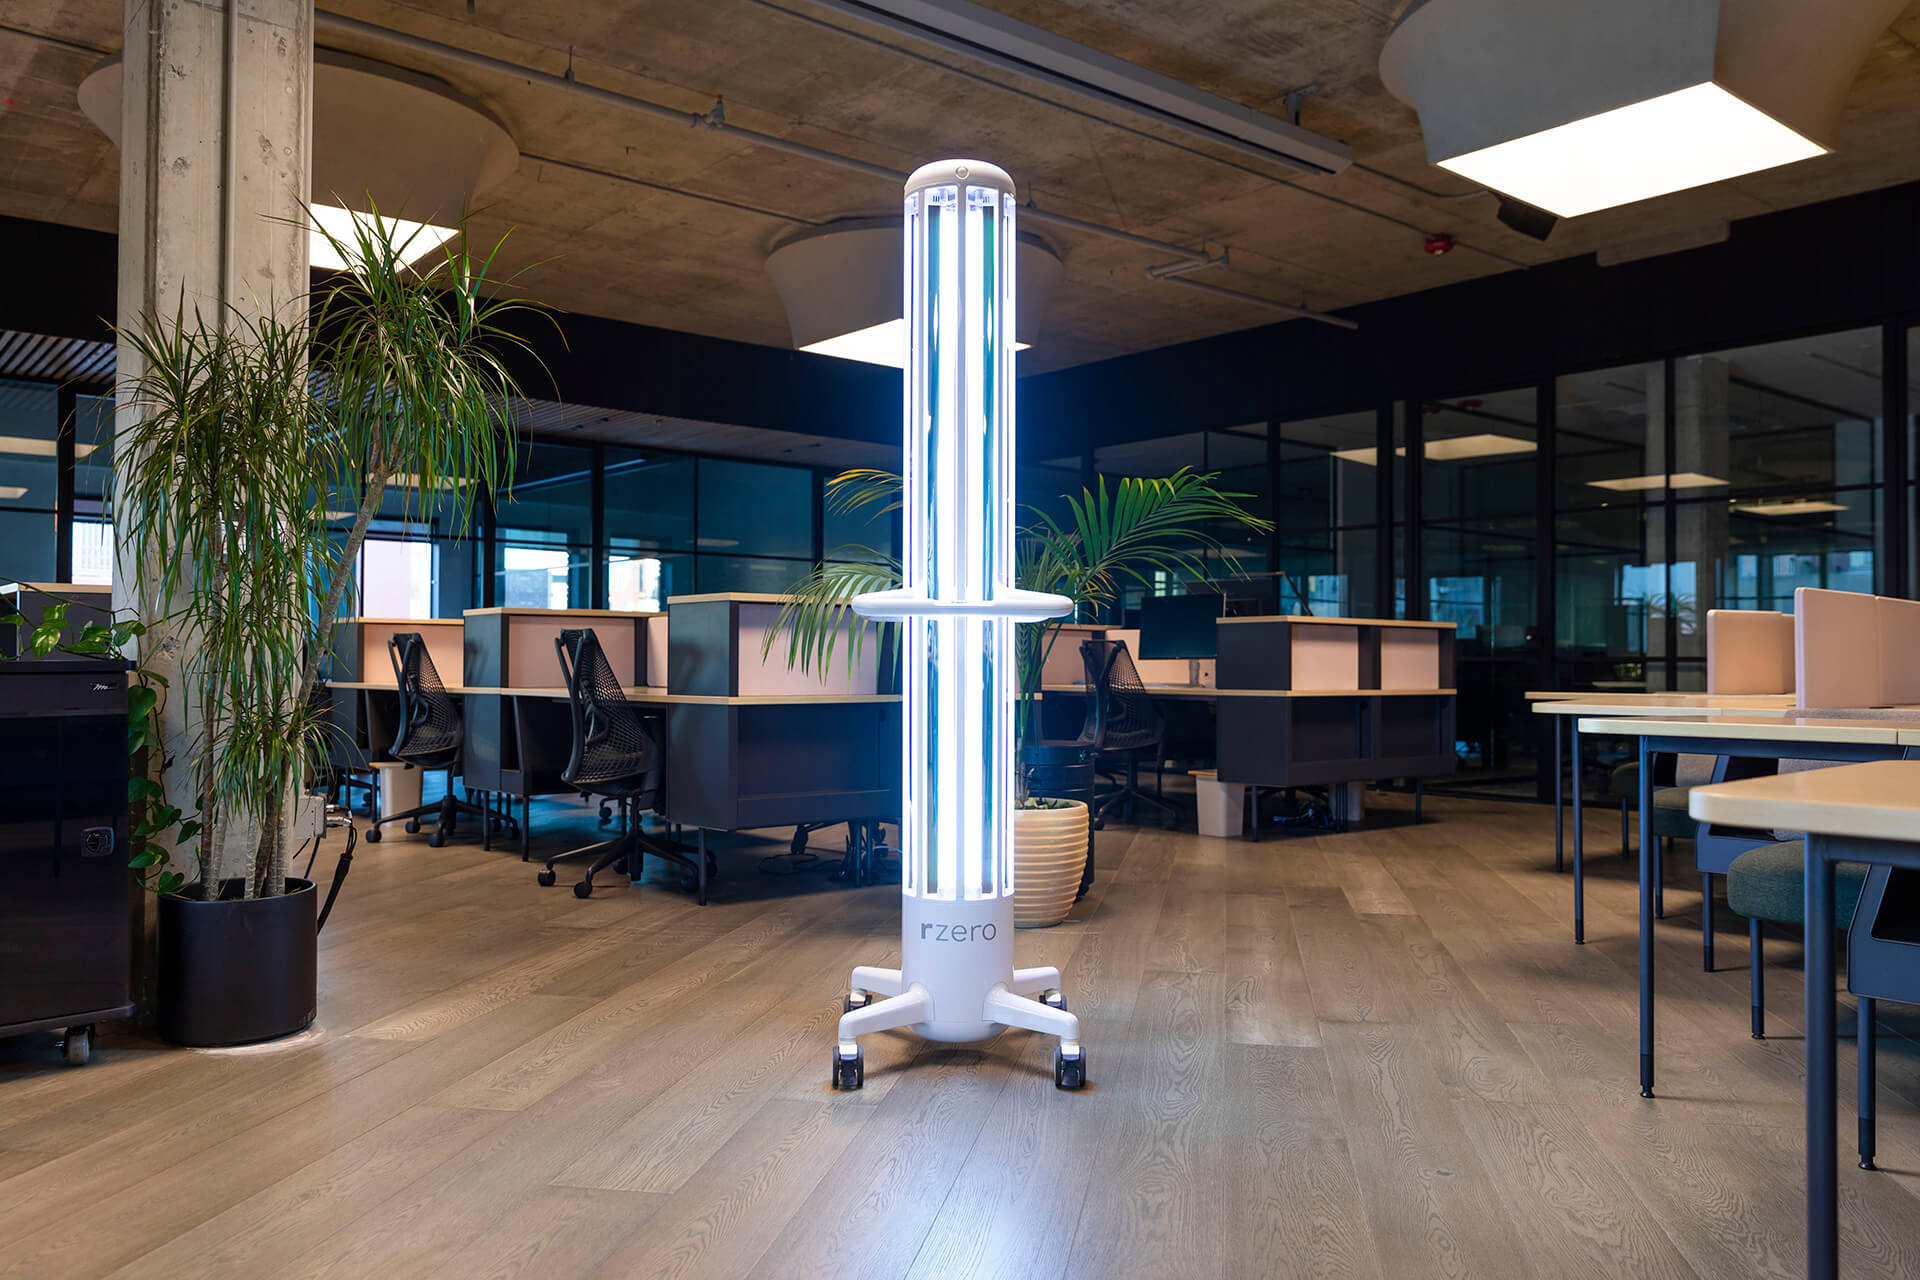 An ARC UV-C disinfection system standing in the middle of an empty office and professional workplace.